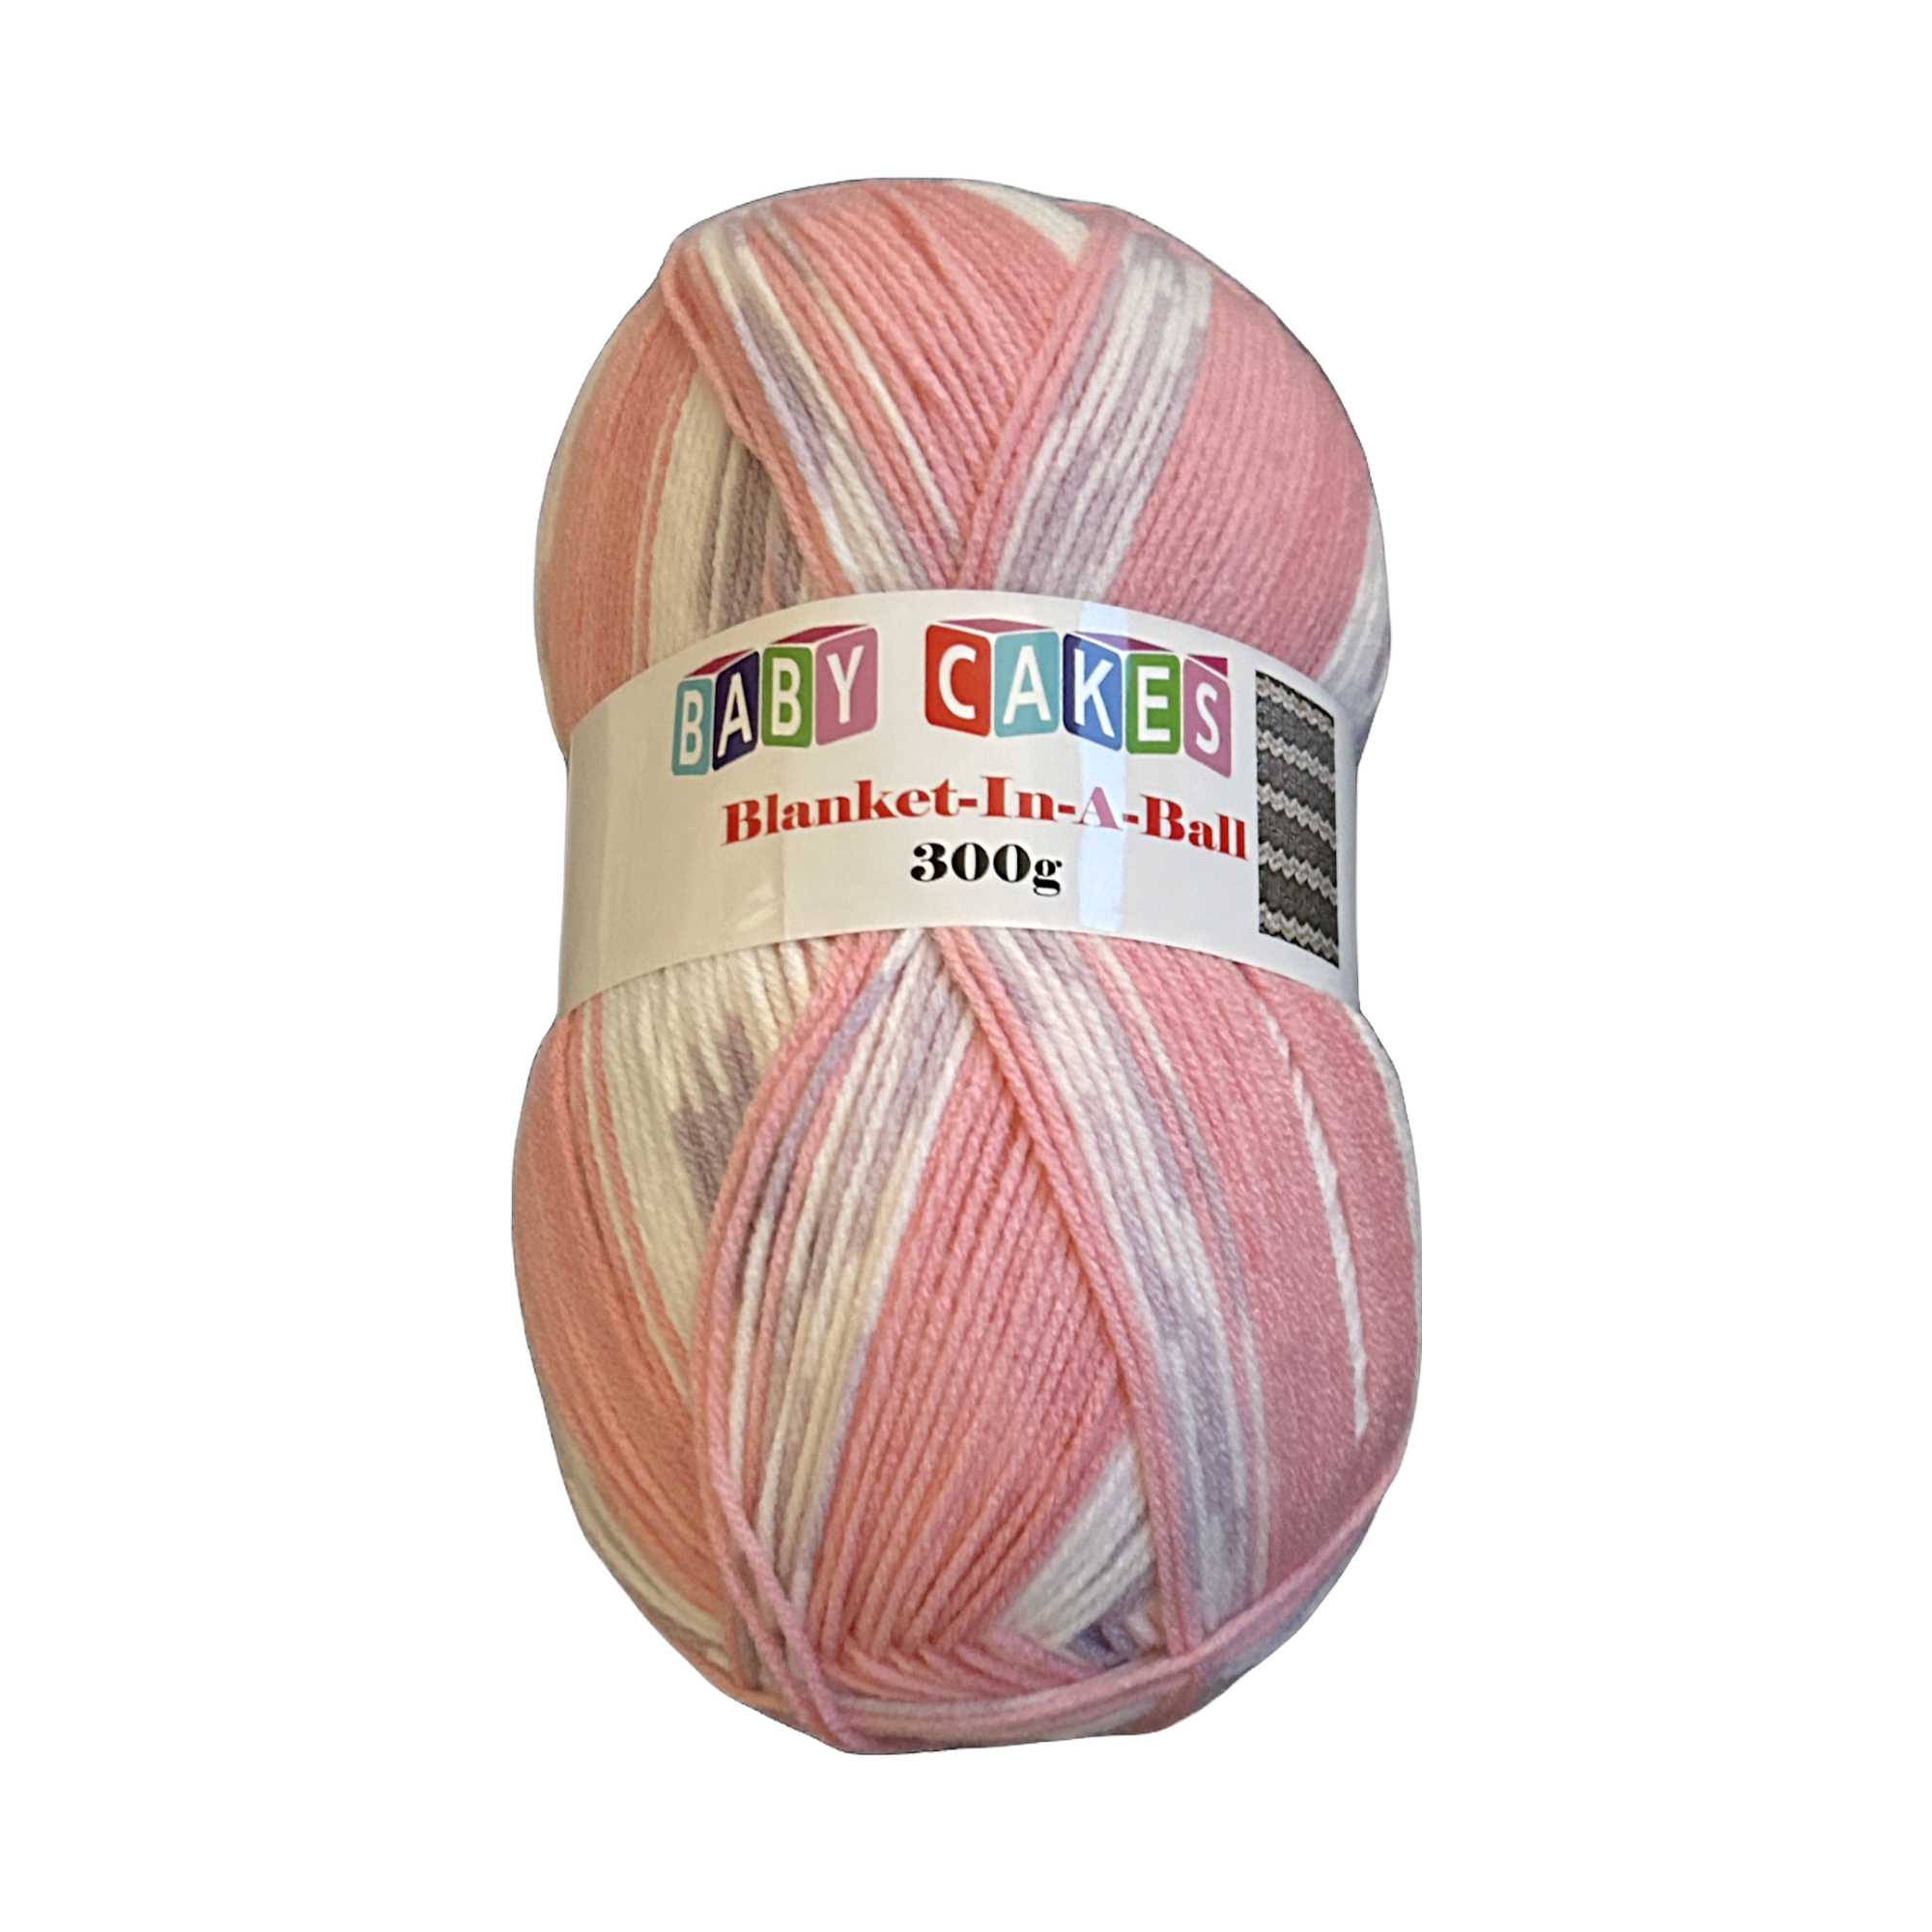 Self-Striping Yarn Cakes - Which brand do I choose? Pattern Ideas & FAQs